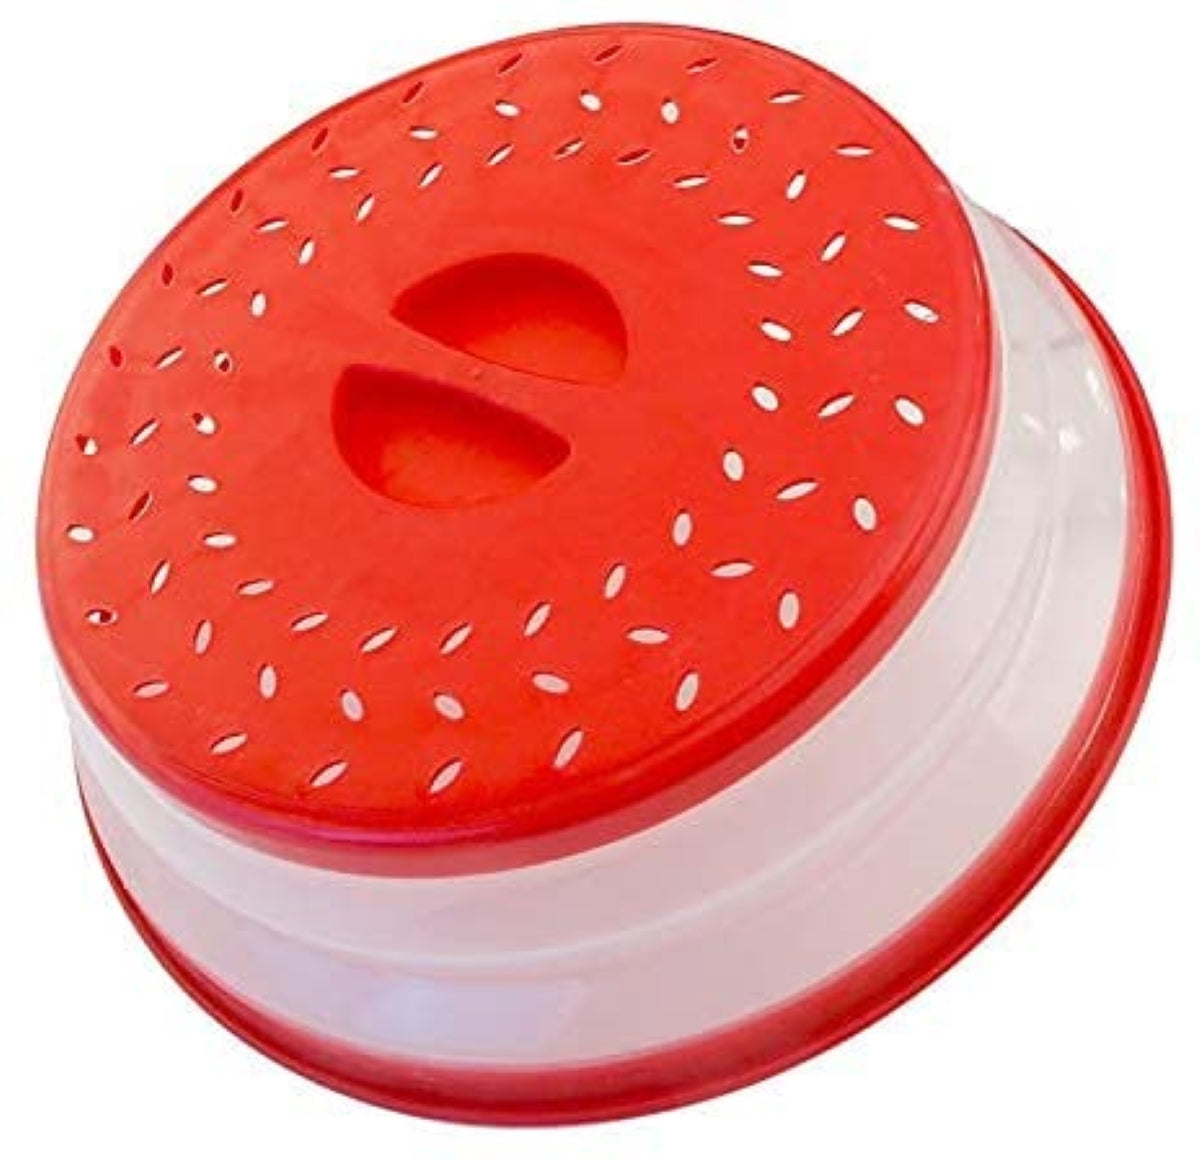 Glass Microwave Plate Cover - Red, 10 x 2-3/8 – Capital Books and Wellness